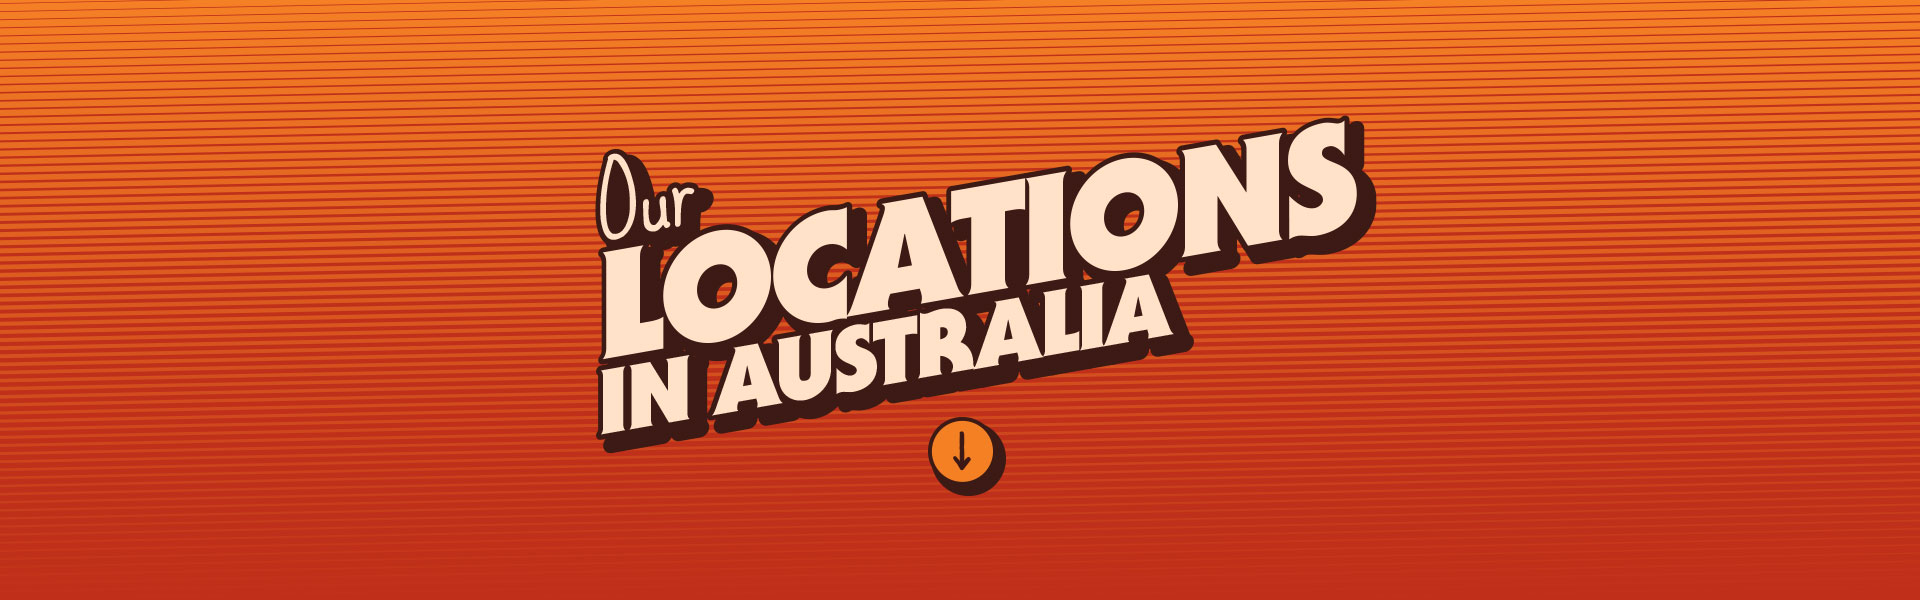 Our Locations in Australia